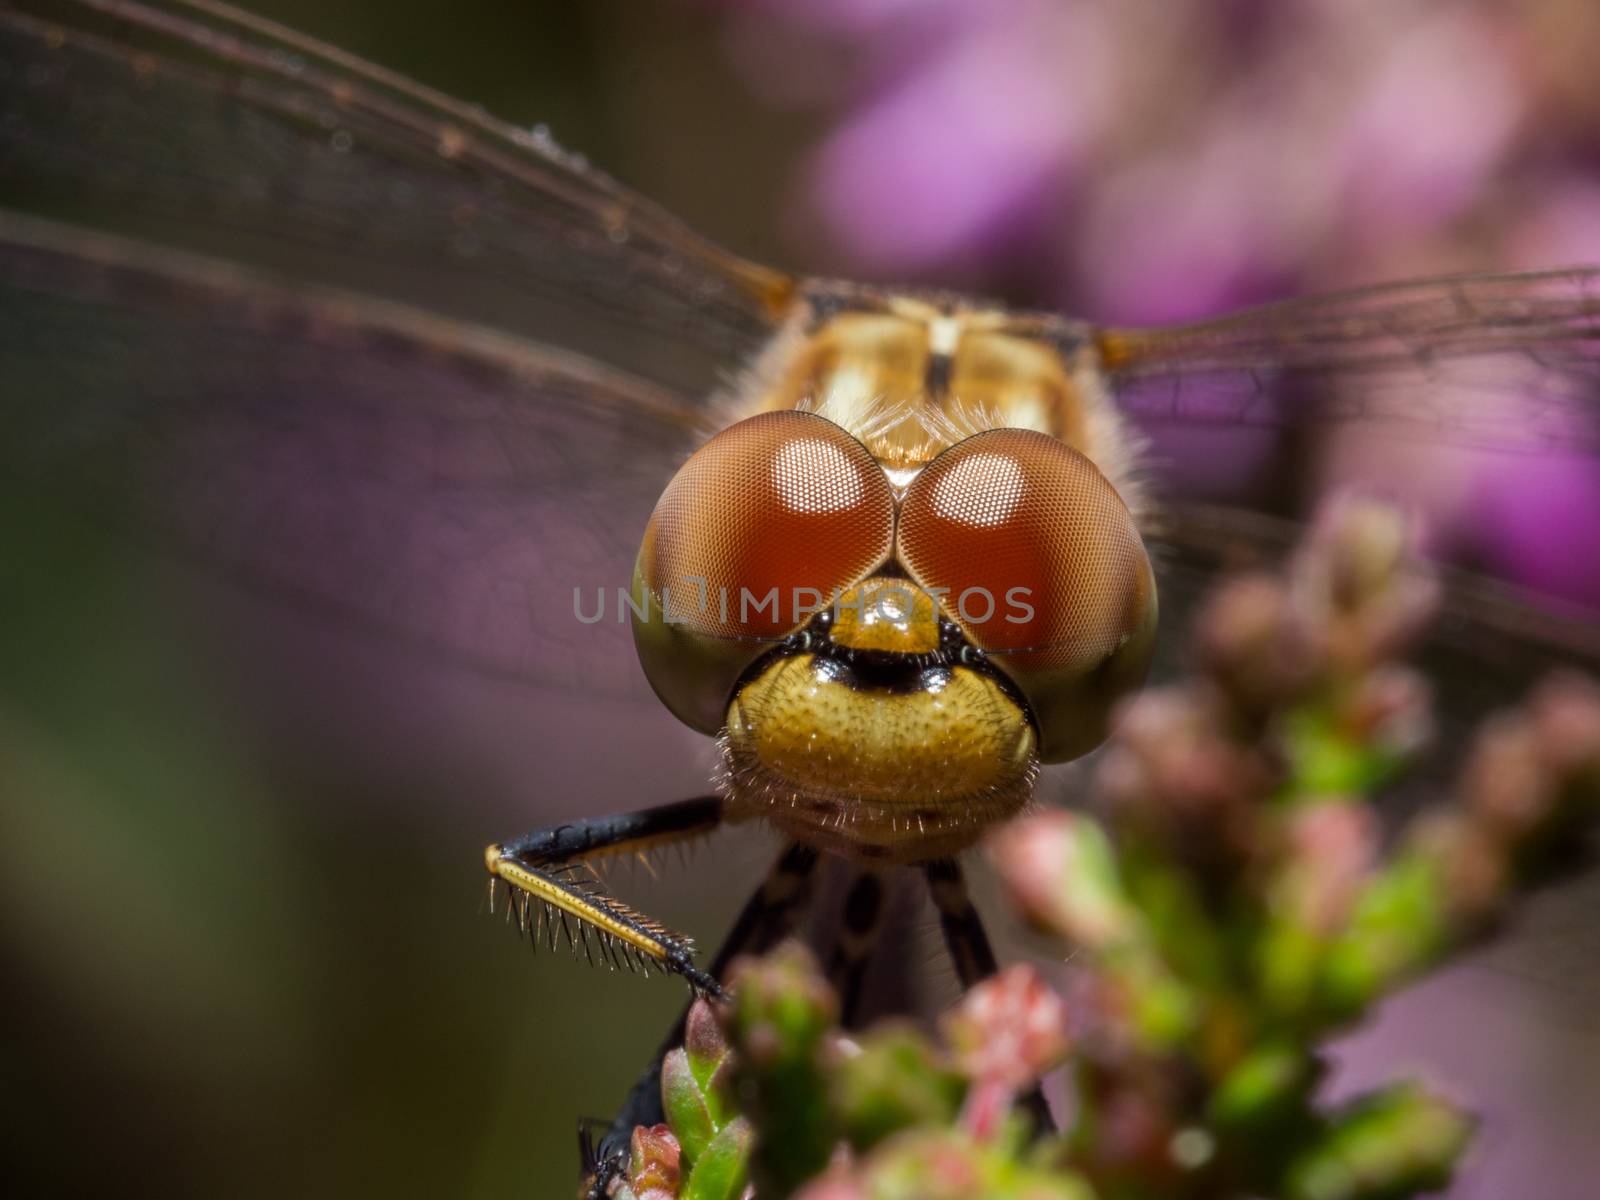 Dragonfly staring at camera with pink flowers in background